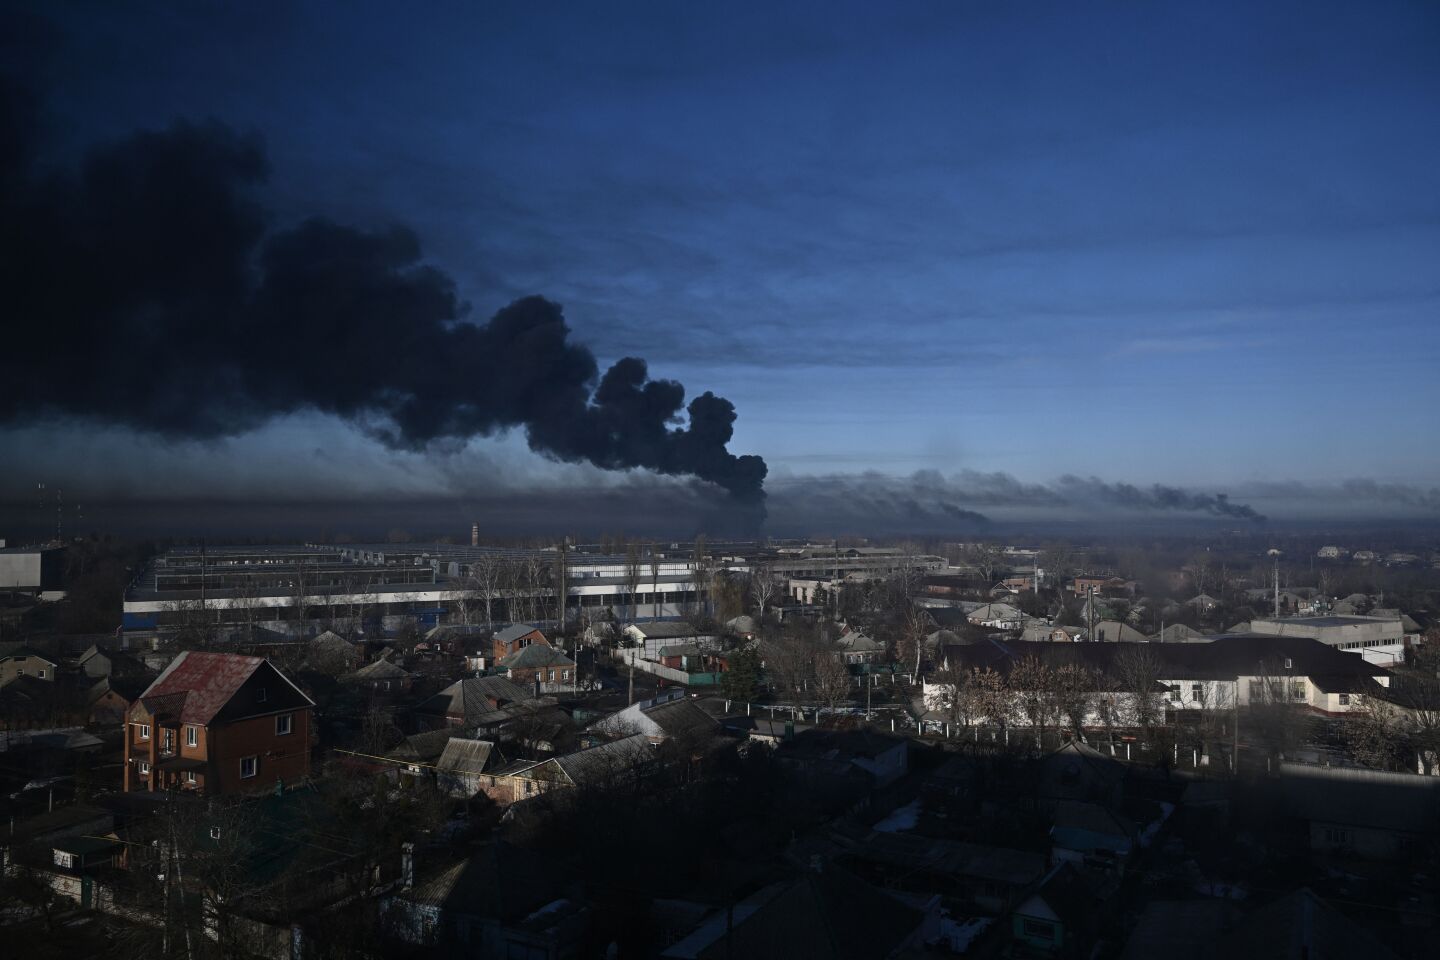 TOPSHOT - Black smoke rises from a military airport in Chuguyev near Kharkiv on February 24, 2022. - Russian President Vladimir Putin announced a military operation in Ukraine today with explosions heard soon after across the country and its foreign minister warning a "full-scale invasion" was underway. (Photo by Aris Messinis / AFP) (Photo by ARIS MESSINIS/AFP via Getty Images)